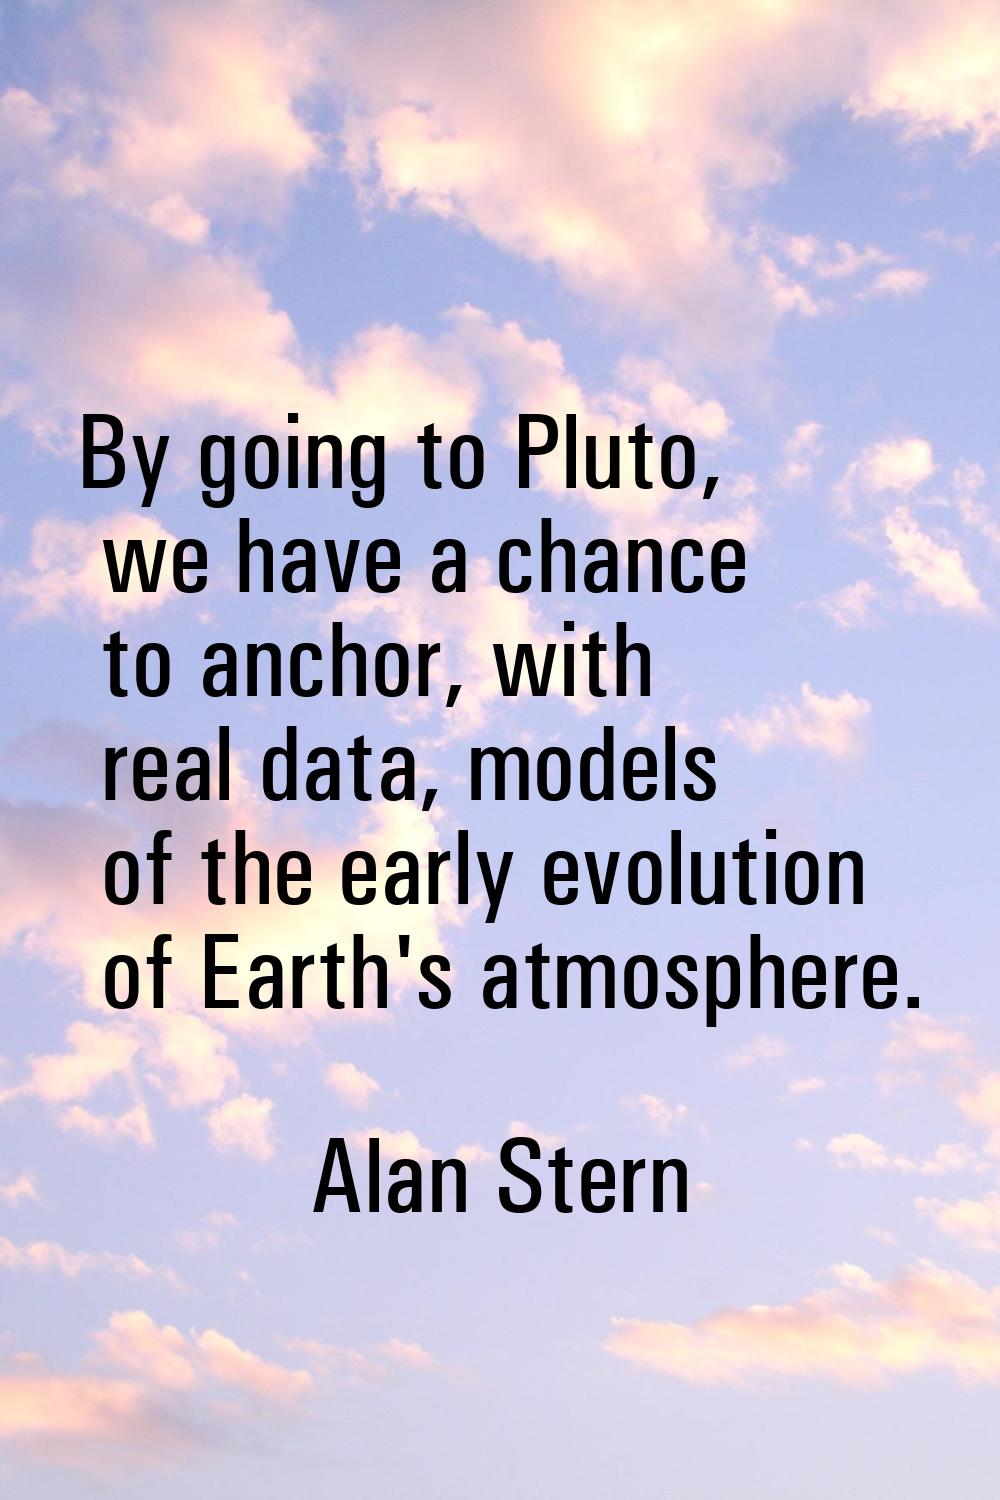 By going to Pluto, we have a chance to anchor, with real data, models of the early evolution of Ear